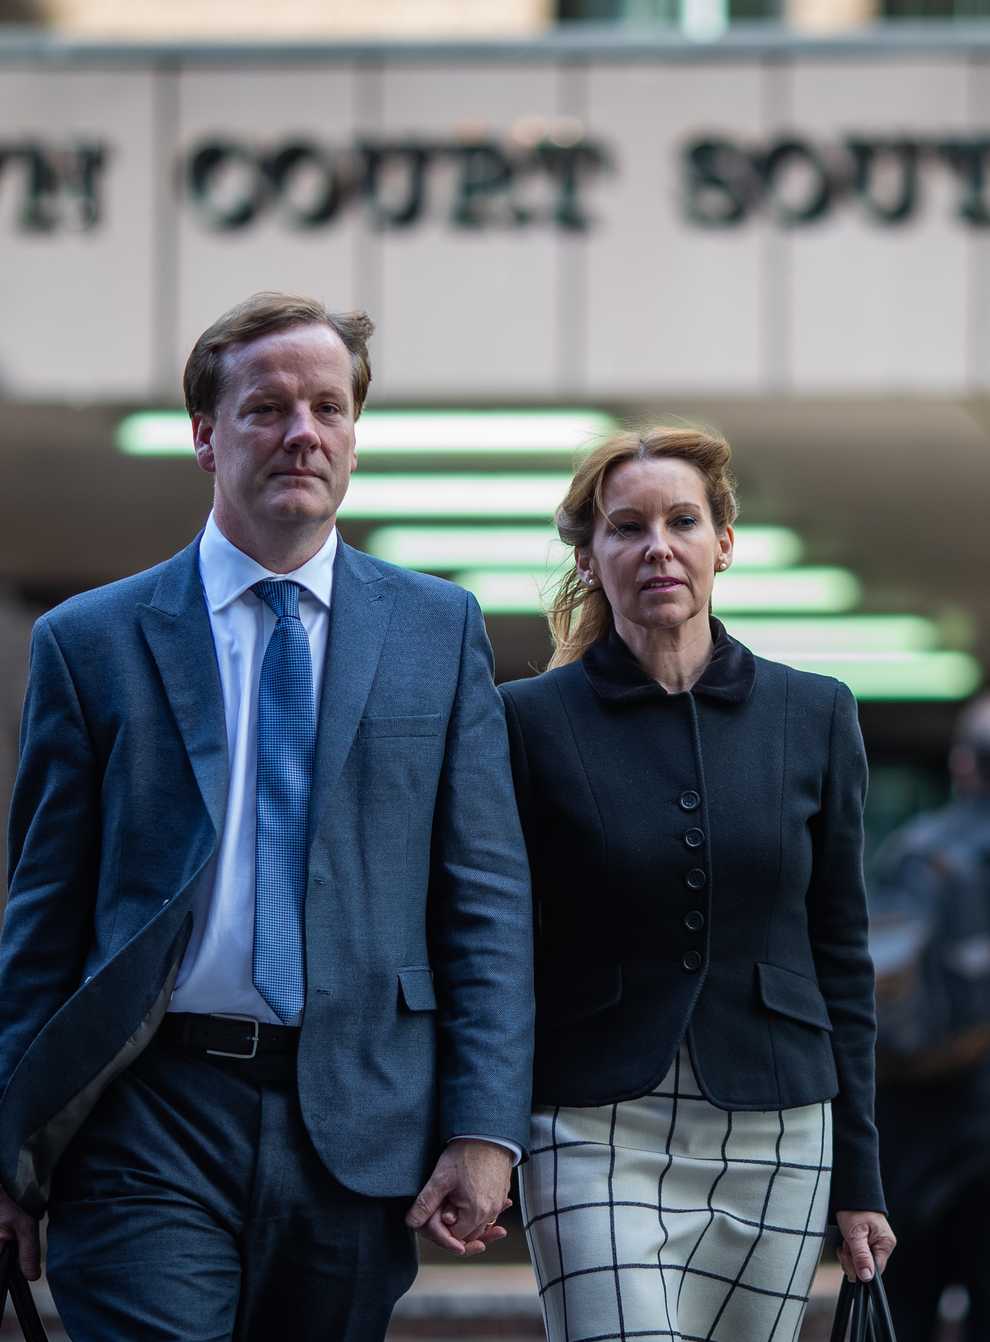 Former Conservative MP Charlie Elphicke, with his wife and current MP for Dover Natalie Elphicke, at Southwark Crown Court in London where he was on trial accused of three counts of sexually assaulting two women